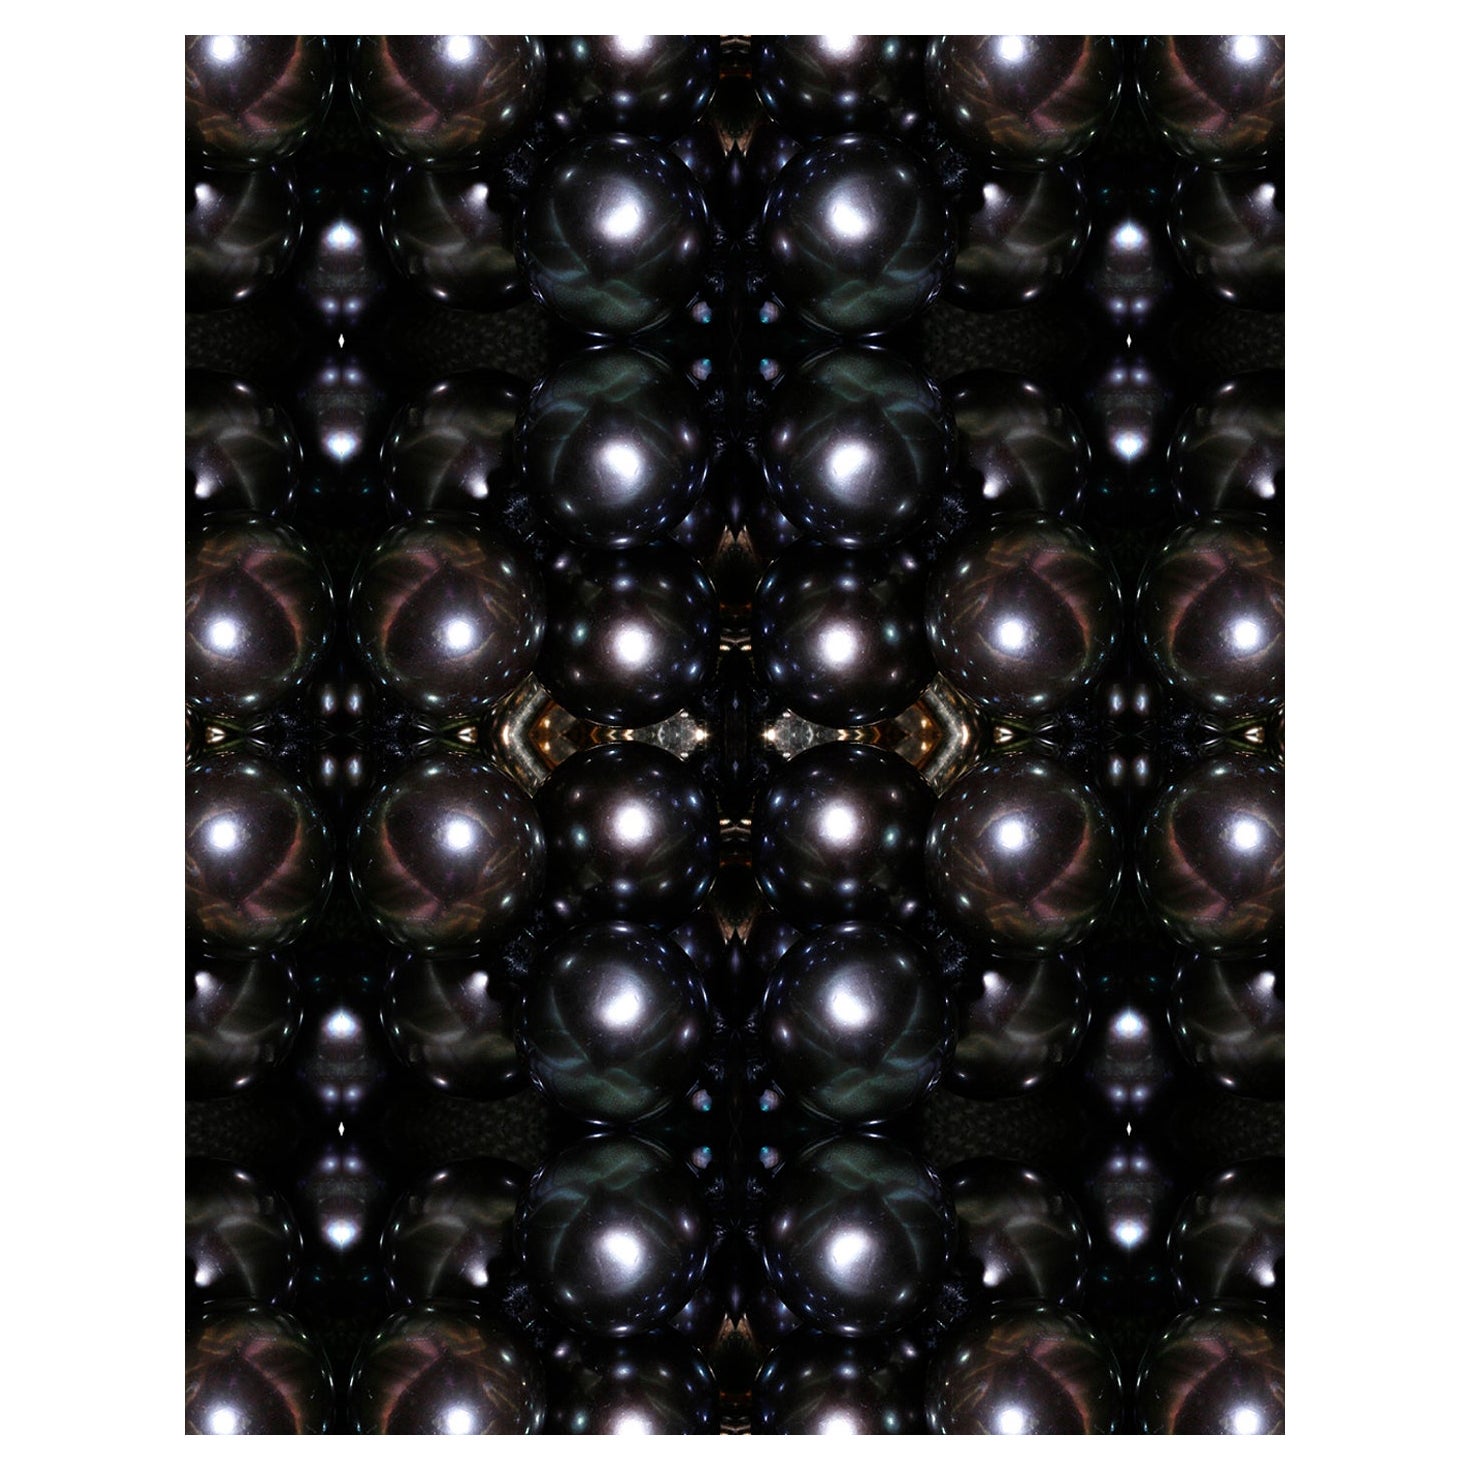 EDGE Collections Overlapping Black Pearls from our Collection no 1